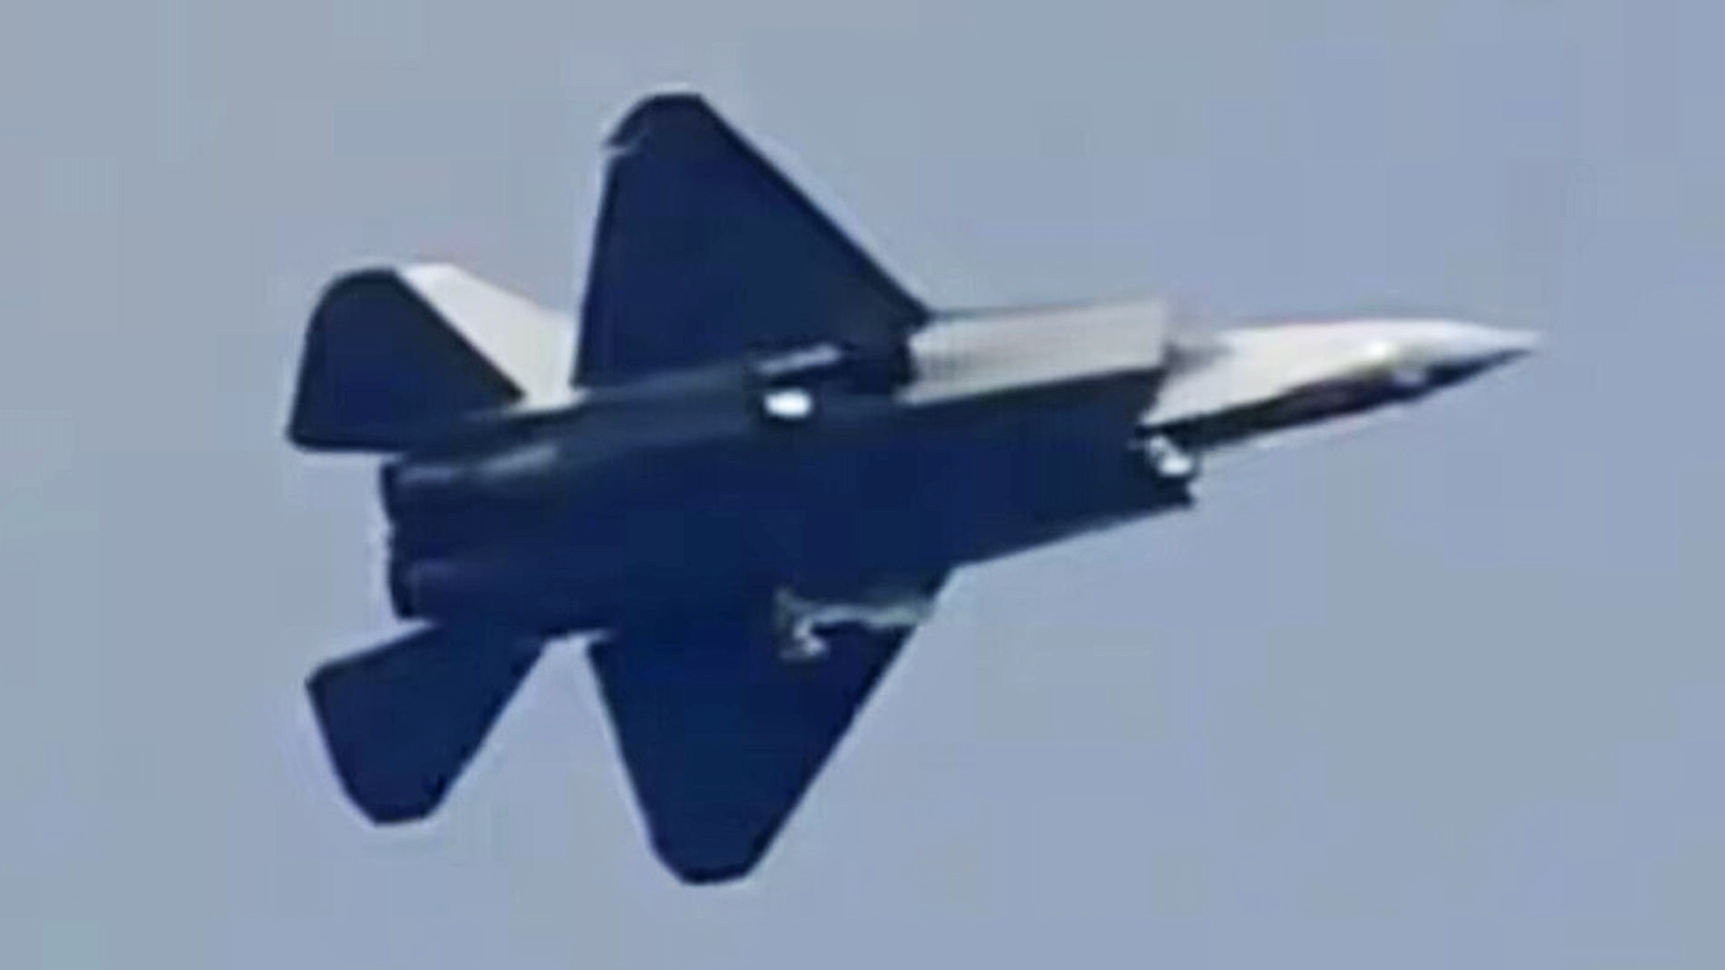 Progressively clearer photos of one of Shenyang’s prototype fighters seems to reveal key features different to those found on the carrier-based J-35, as well as on the earlier FC-31 prototypes. This raises questions about China’s own plans for a potential land-based variant, as well as future export plans, with Pakistan known to have made official plans to acquire a version of the jet.